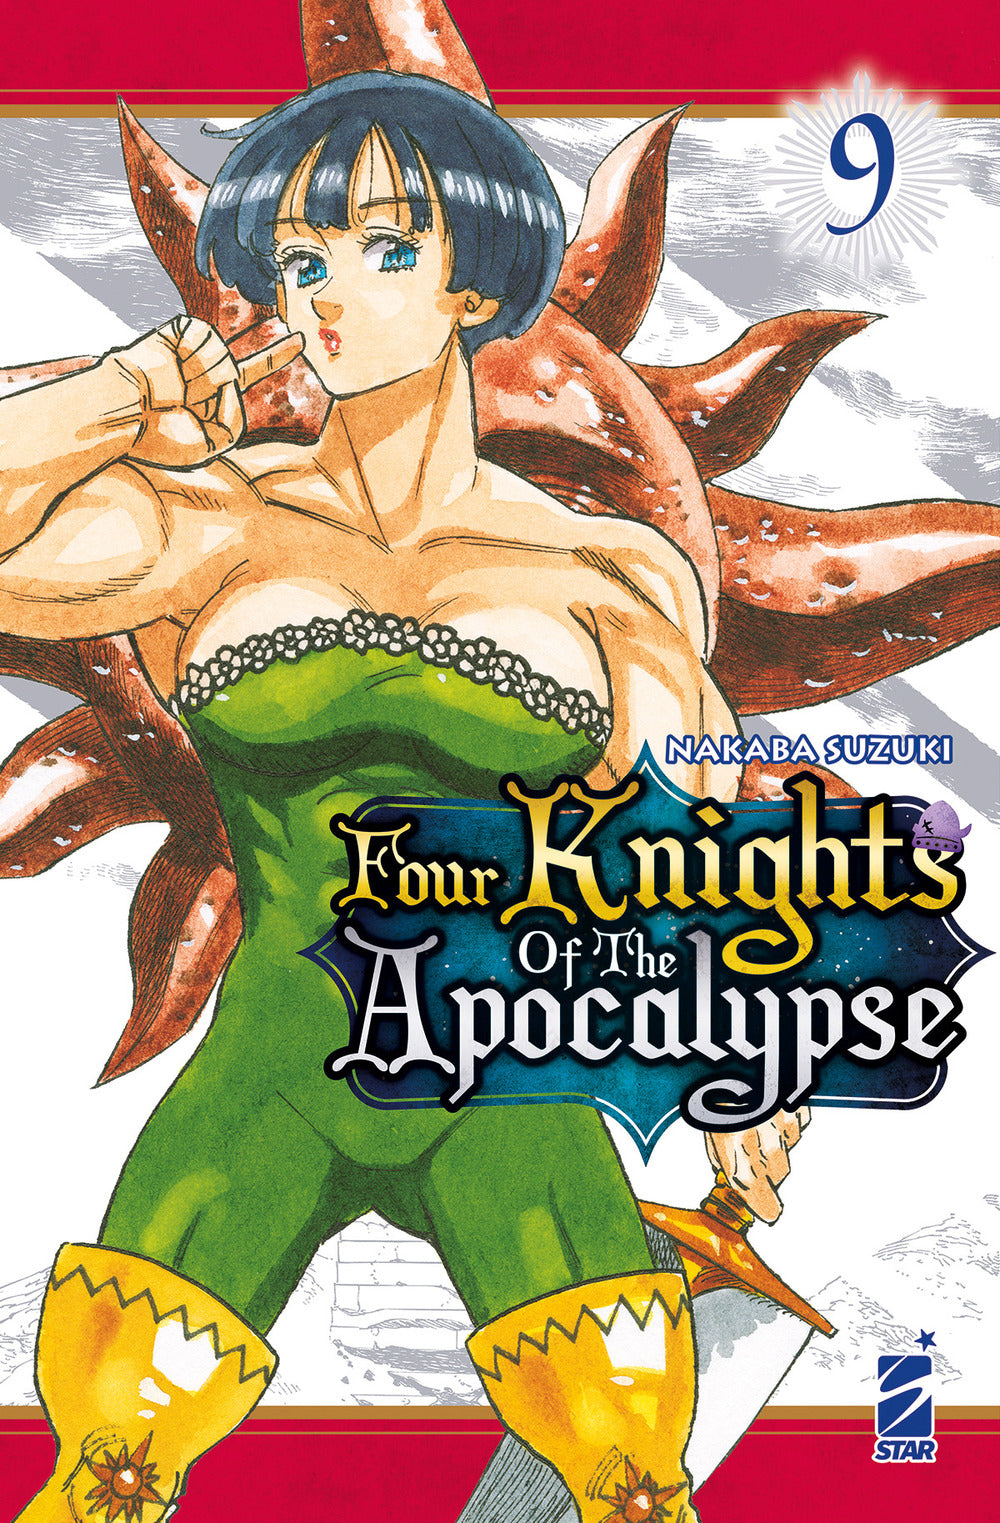 Four knights of the apocalypse. Vol. 9